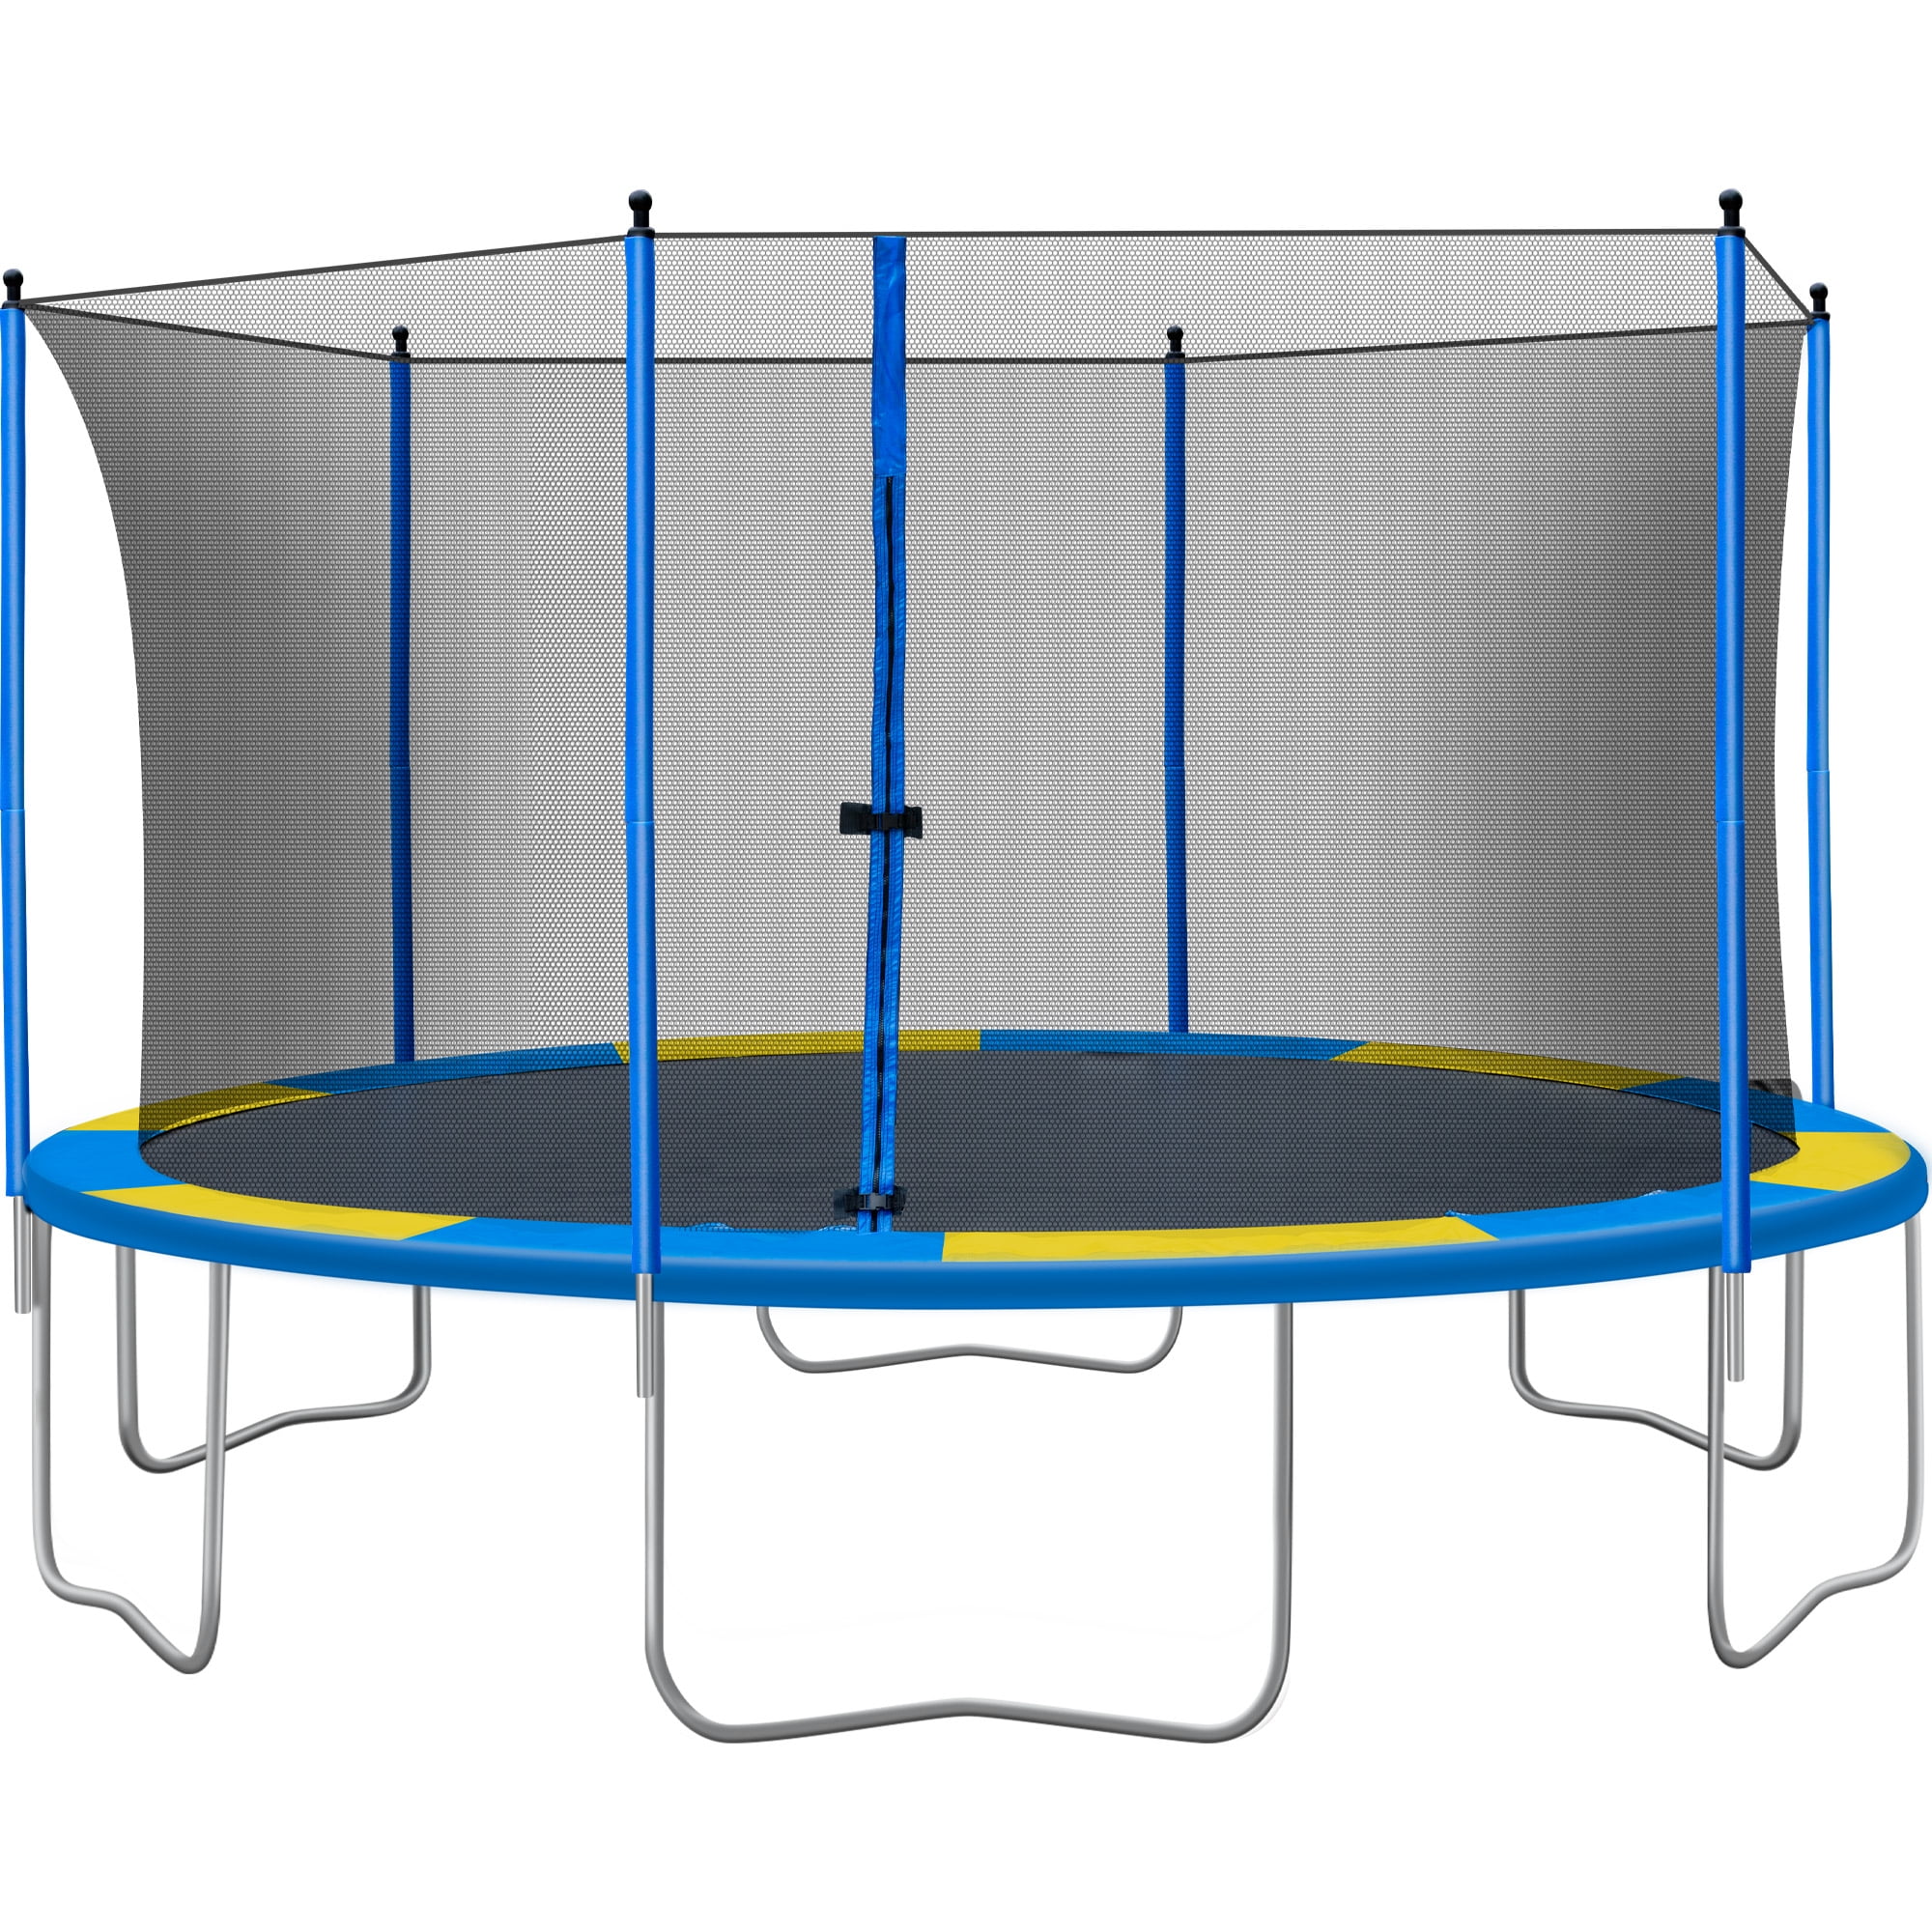 Anysun 14 Ft. Trampoline 330 lbs Weight Capacity for Kids with Safety Enclosure Net Outdoor Trampolines